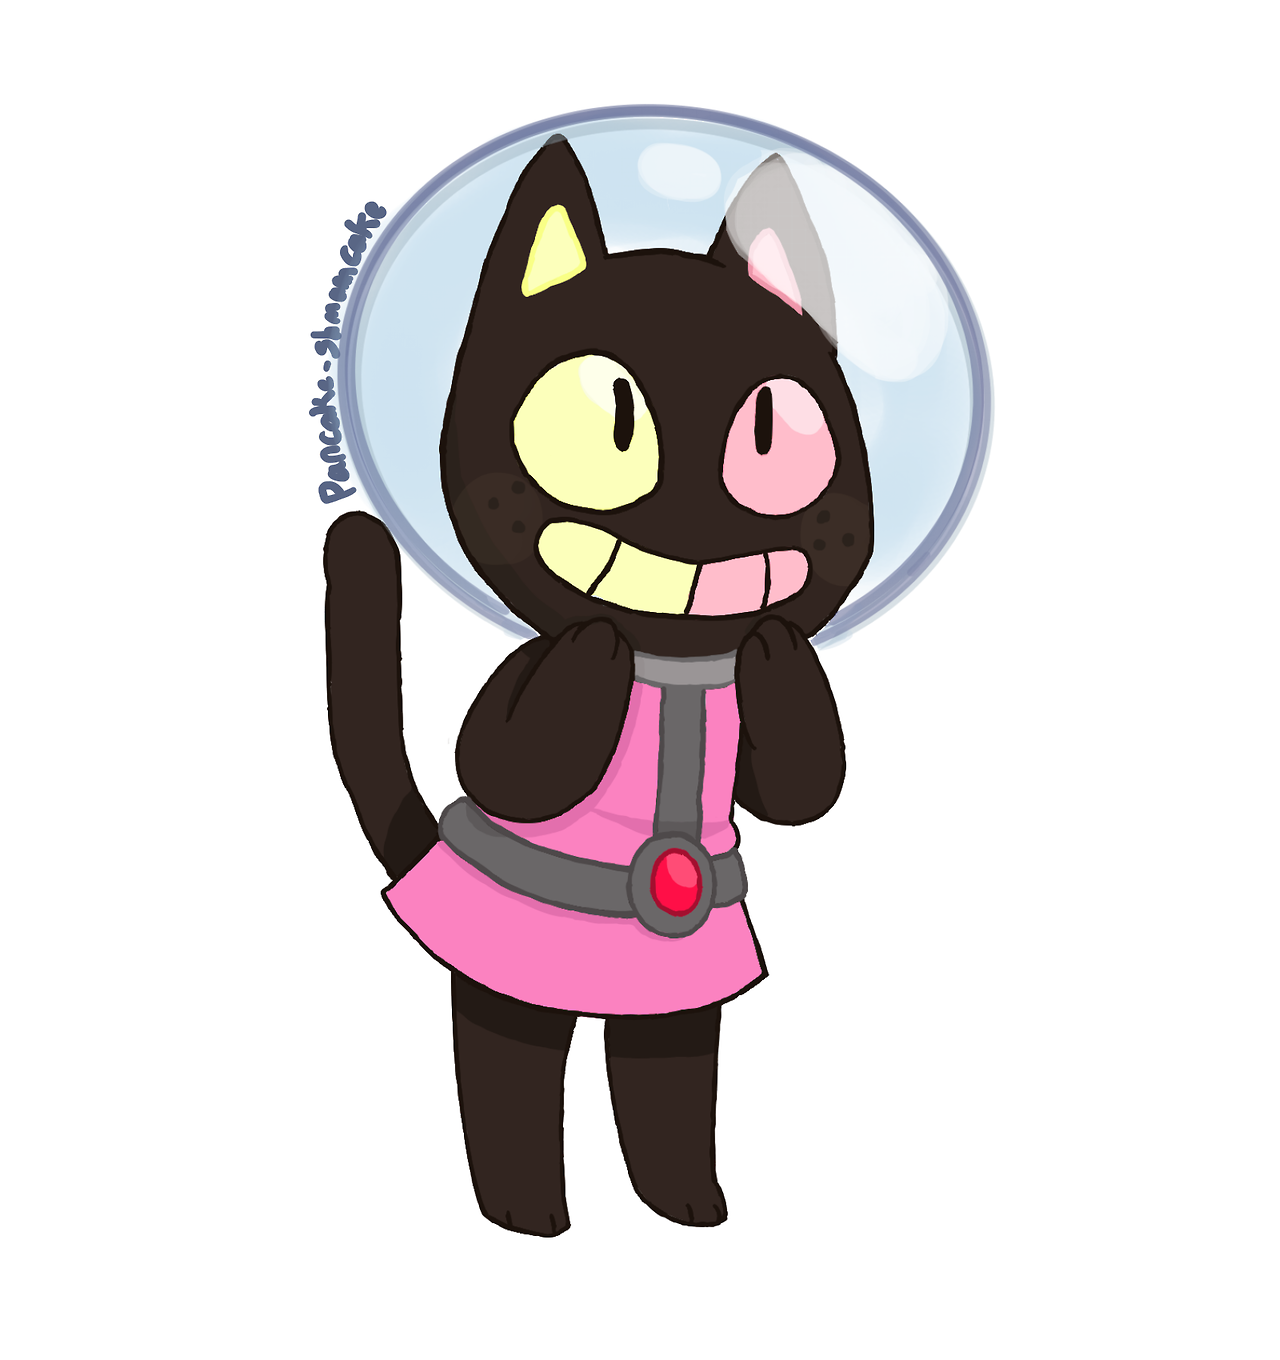 I…. I just wanted to doodle cookiecat as an animal crossing character…. It got a bit out of hand he would have a lazy personality